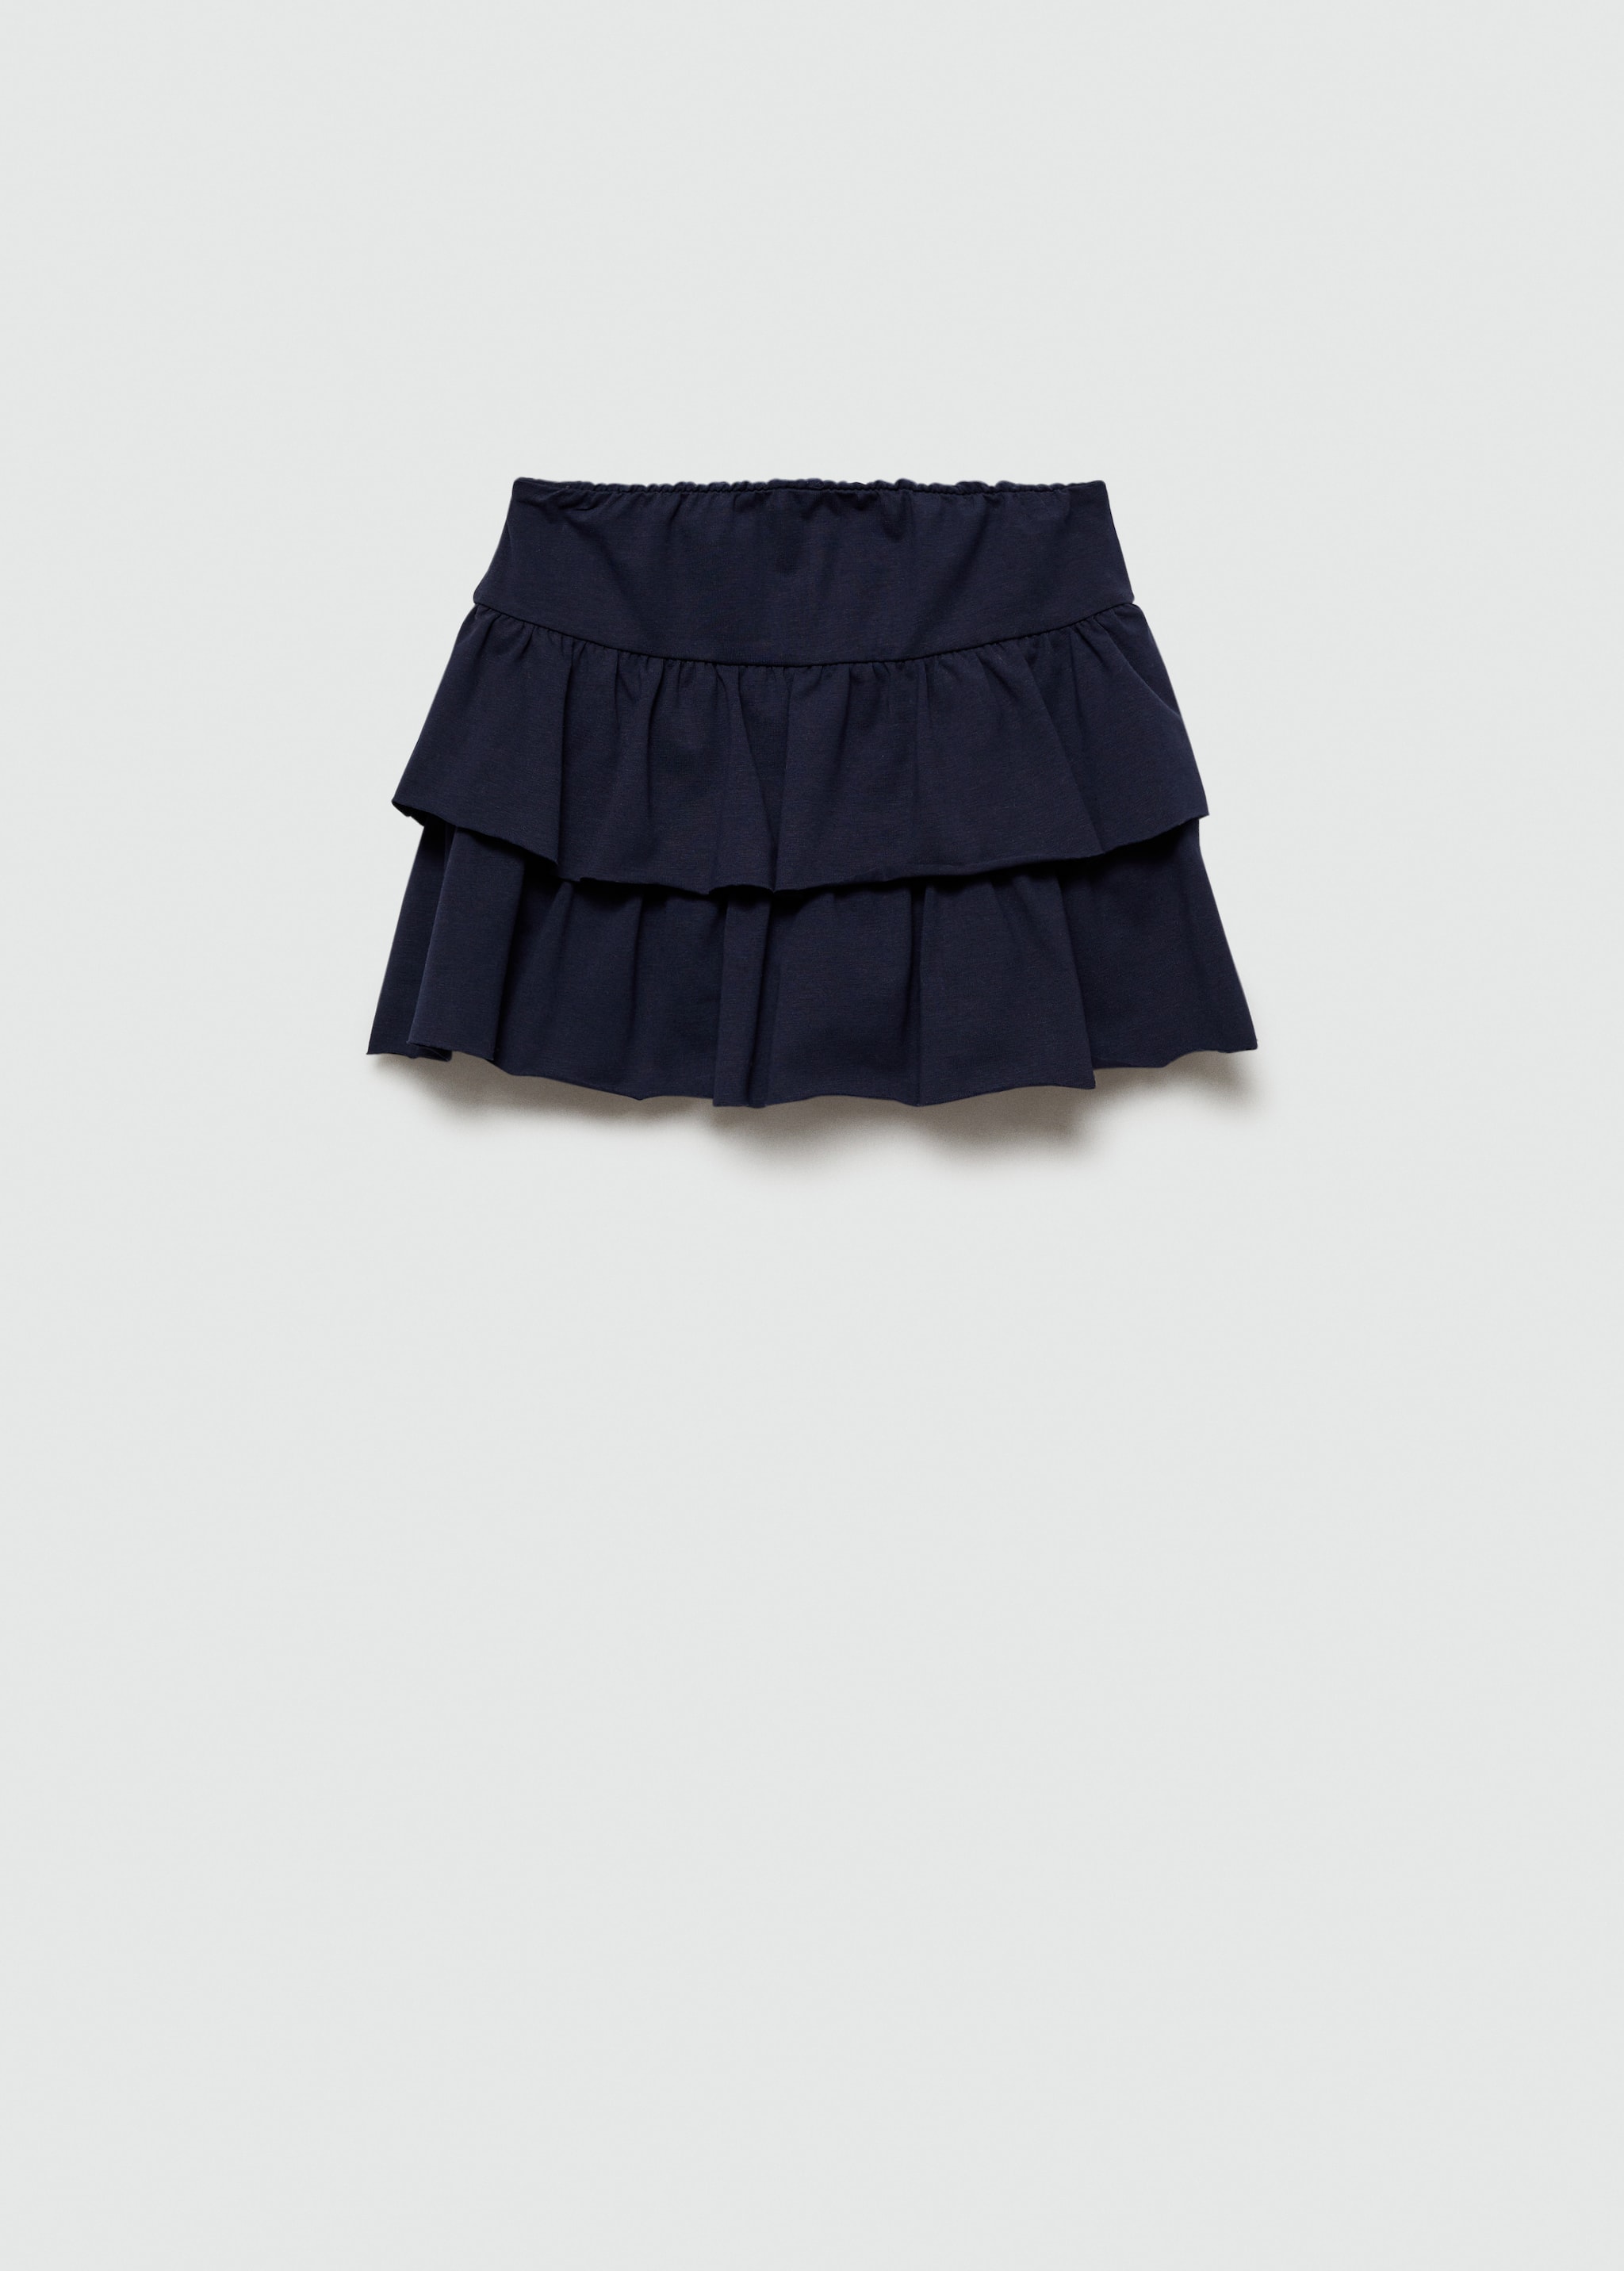 Ruffled trouser skirt - Article without model